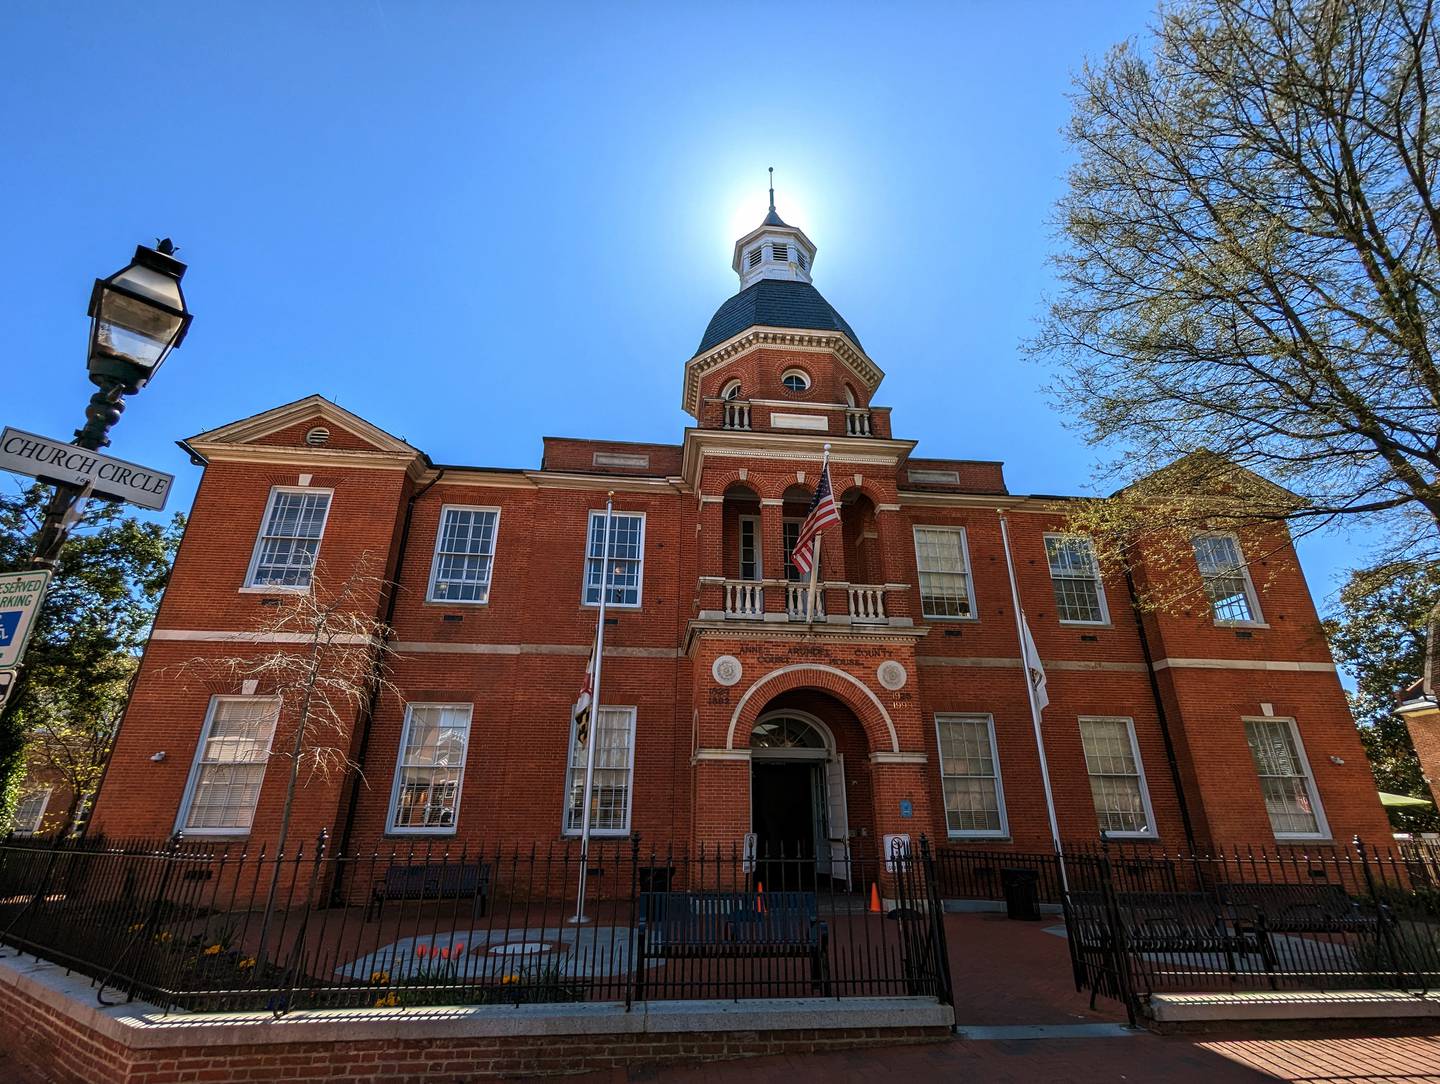 The Anne Arundel County Courthouse is located on Church Circle in Annapolis. It is home to the Circuit Court, the Clerk of the Court, the State Attorney's Office and other agencies.